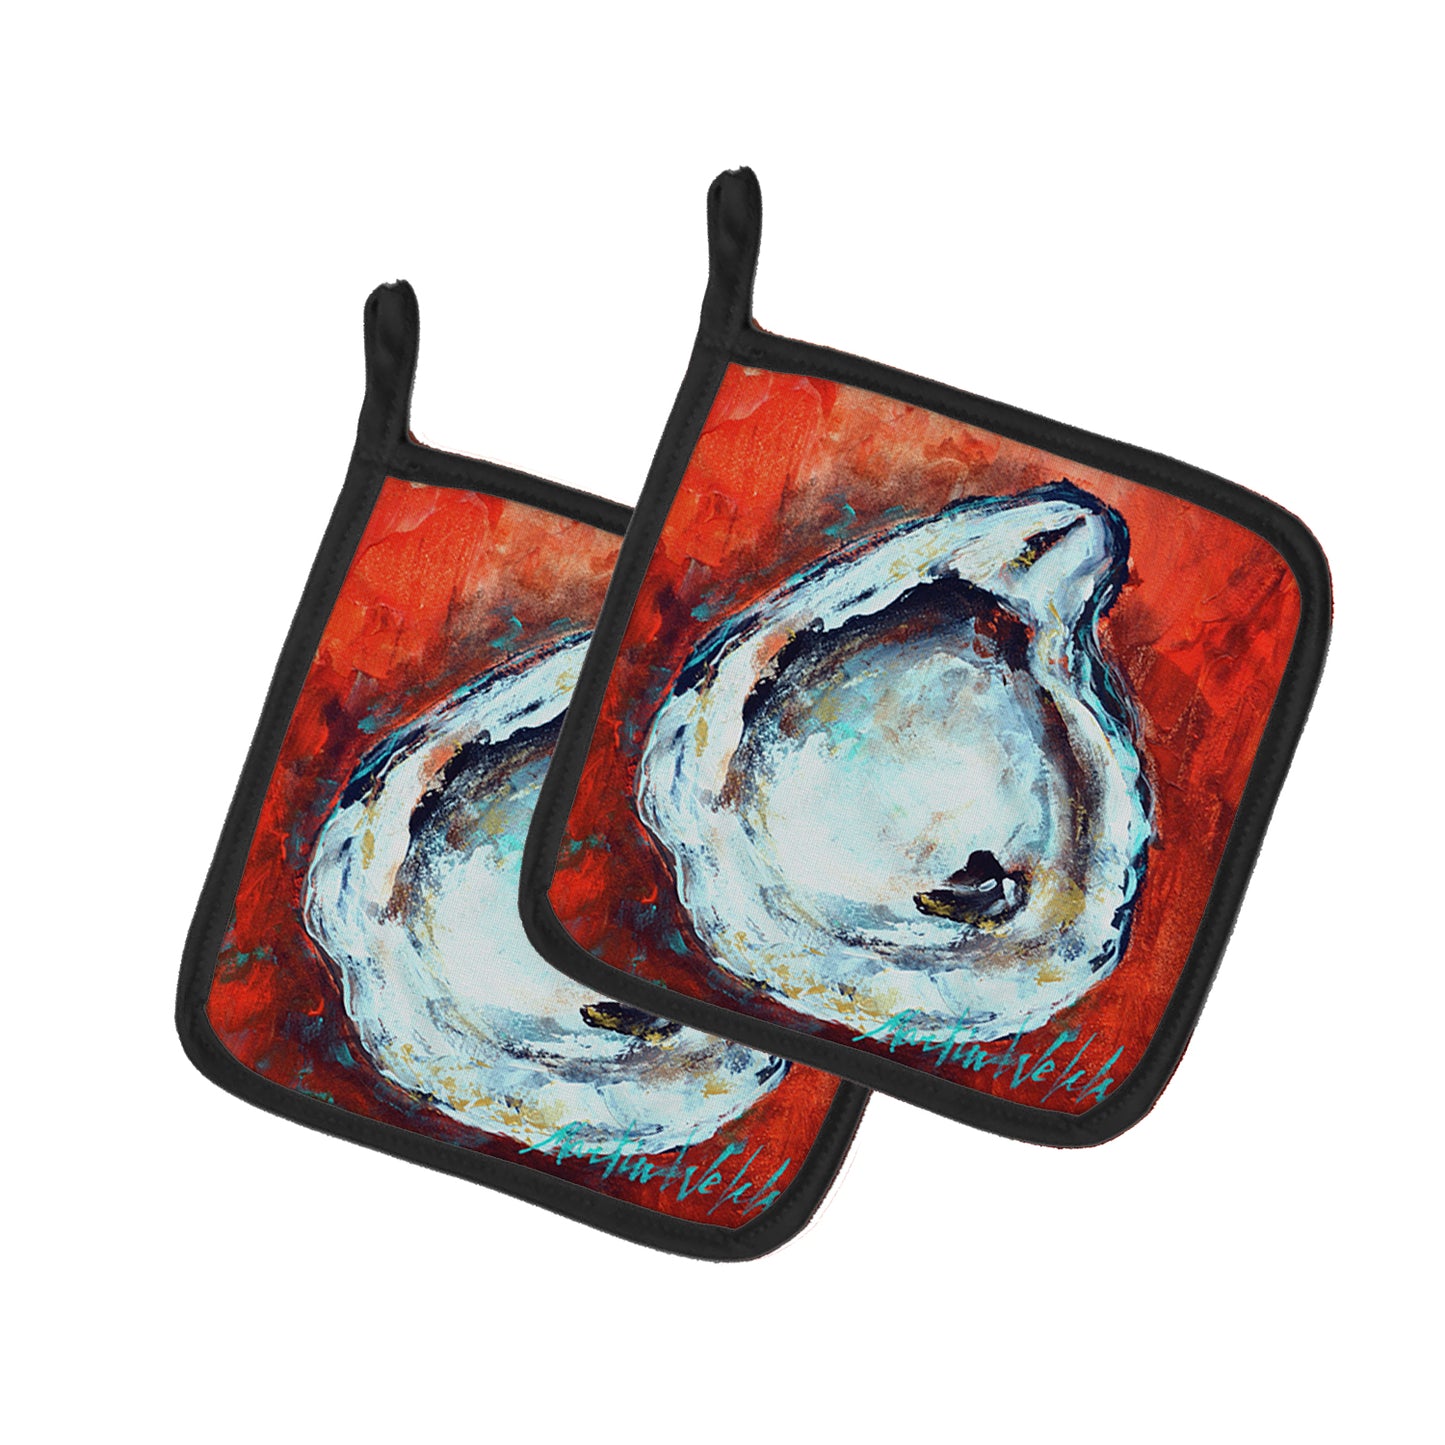 Buy this Char Broiled Oyster Pair of Pot Holders